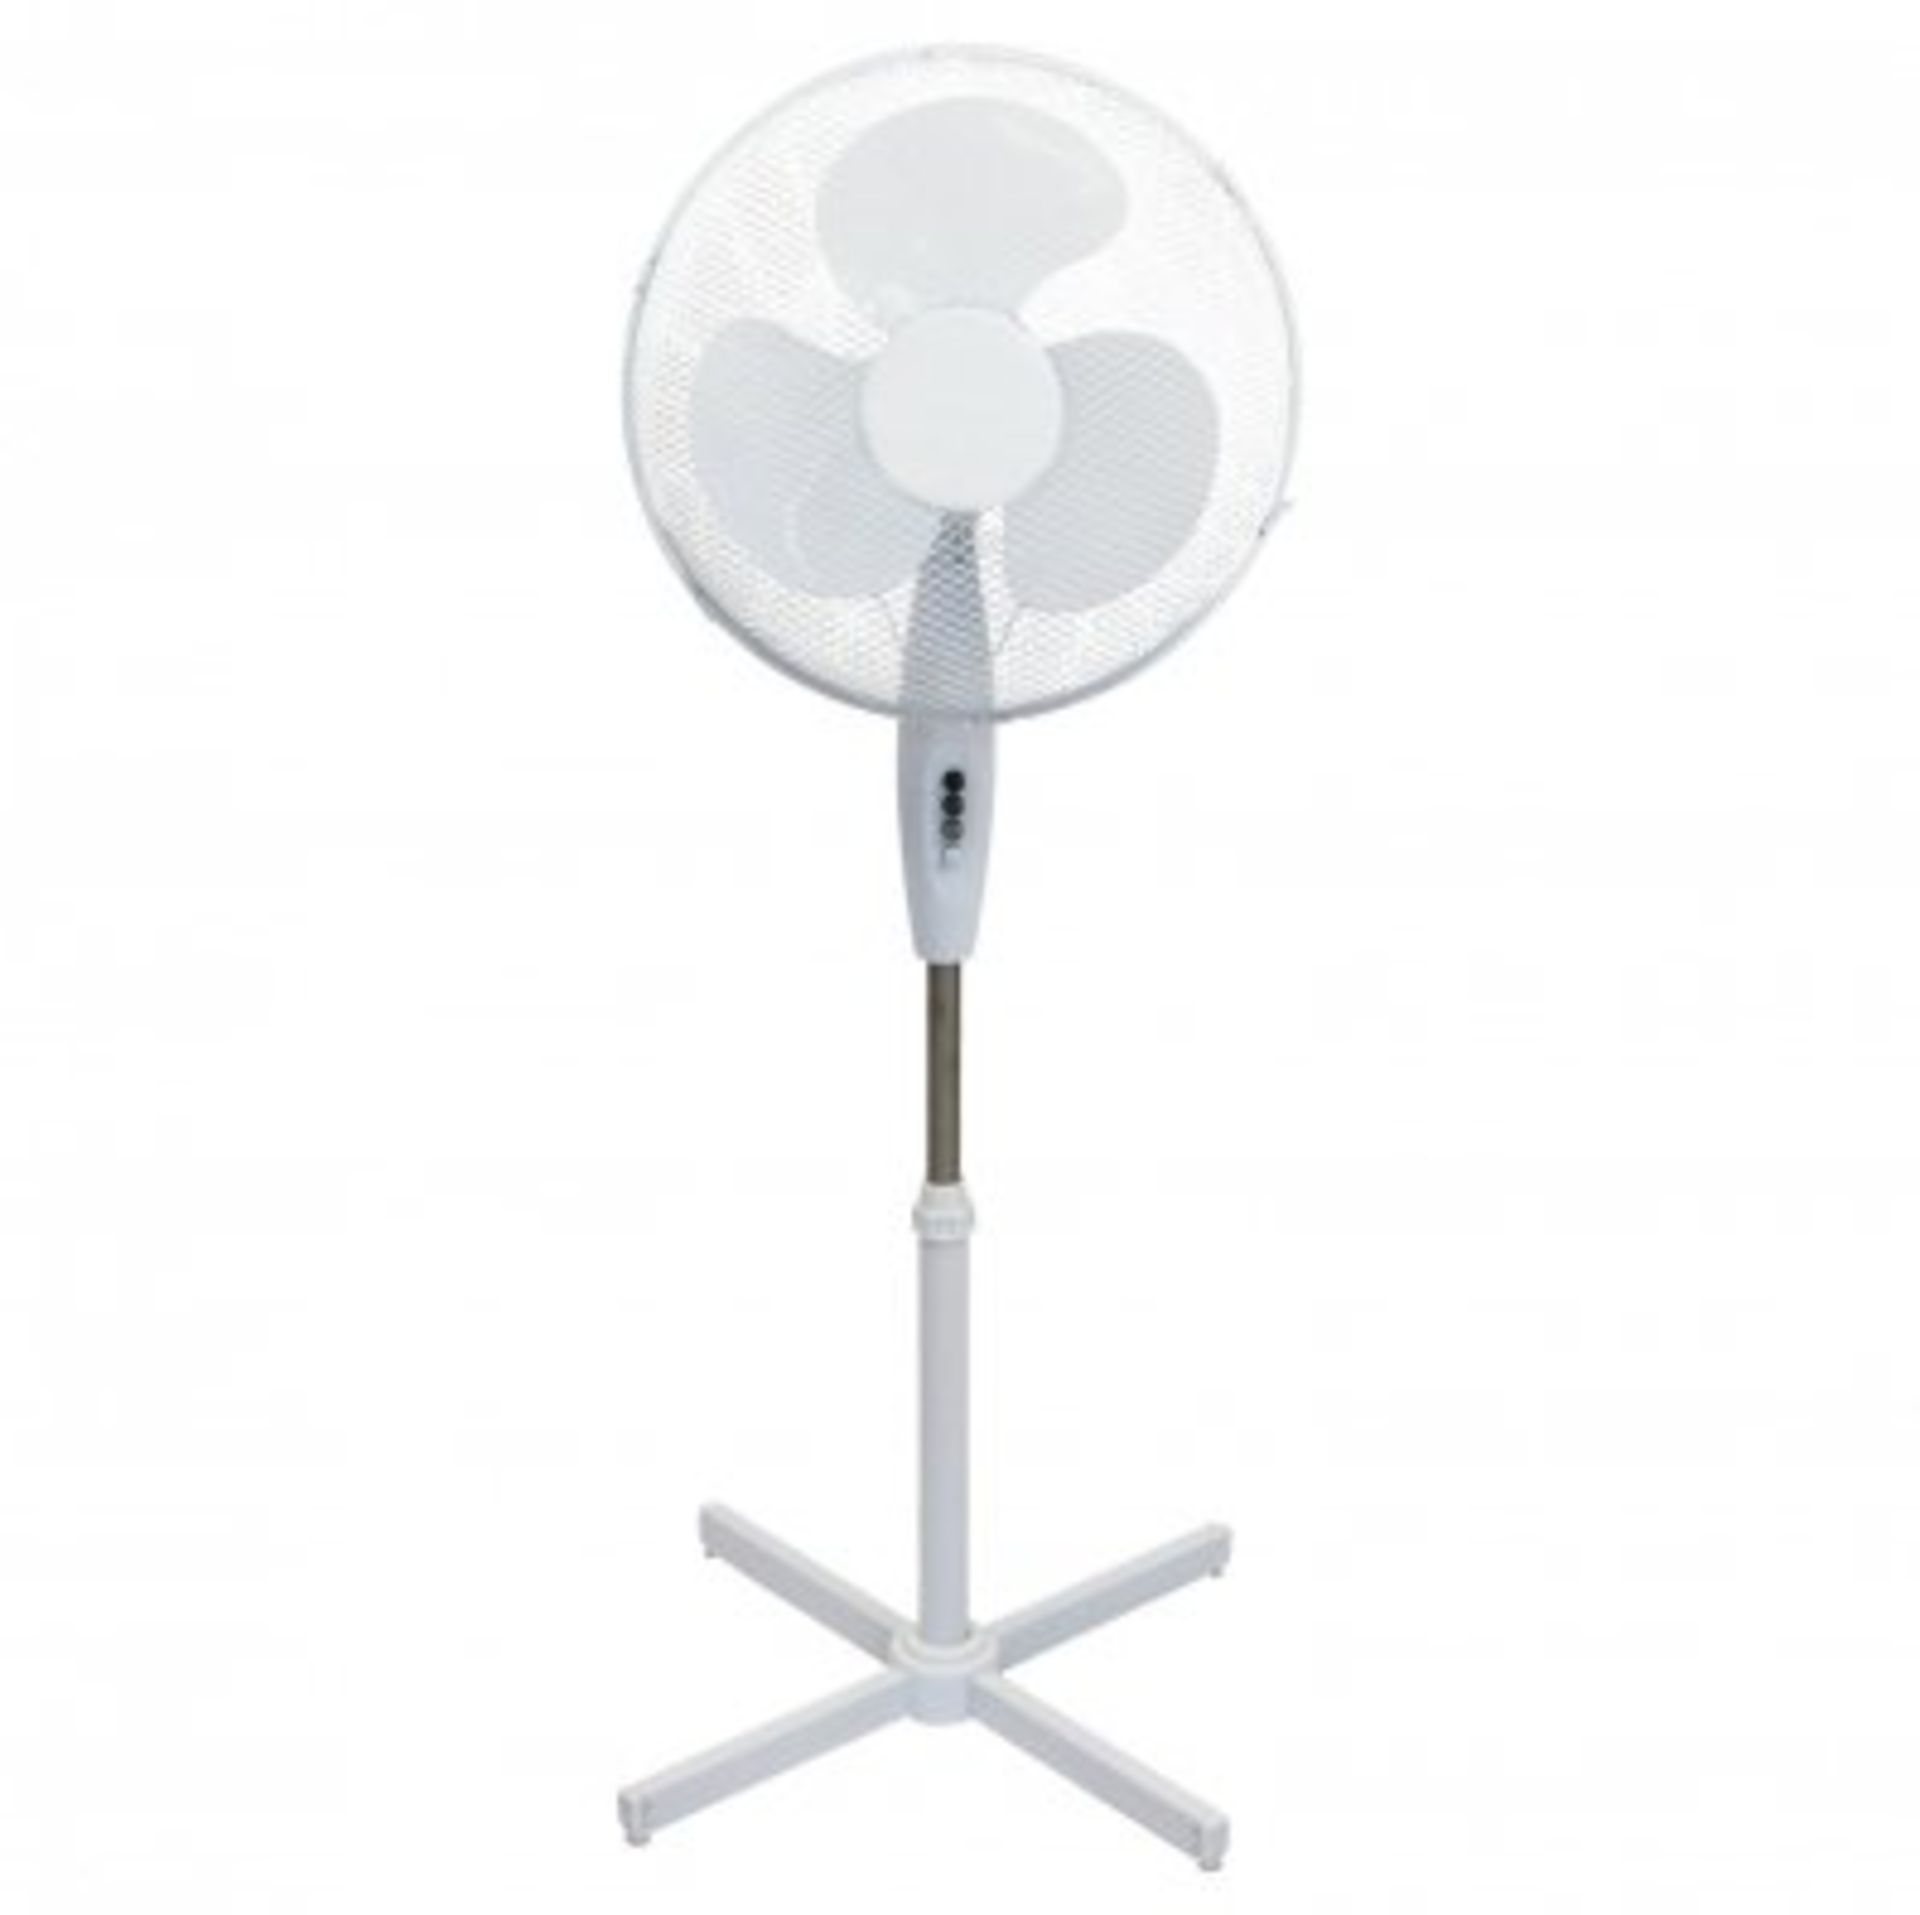 (TD91) 16" Oscillating Pedestal Electric Fan The fan head oscillates and tilts which me...